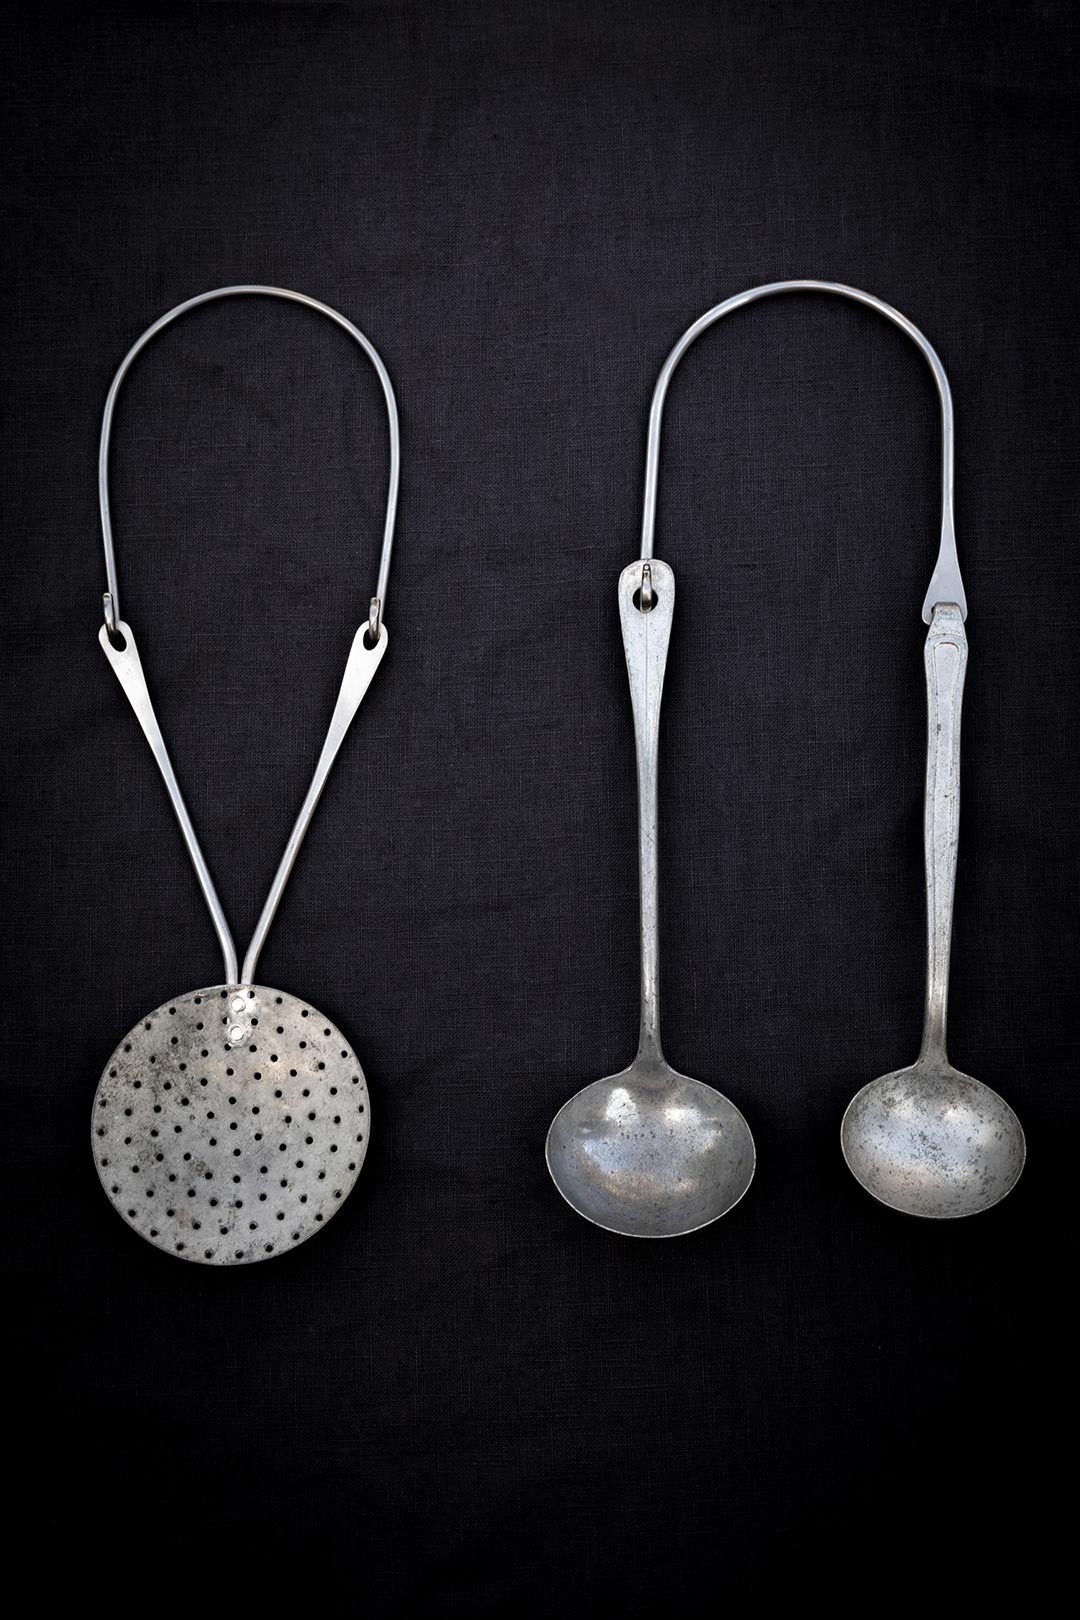 Strained and on display spoon necklaces by Jessica Andersen